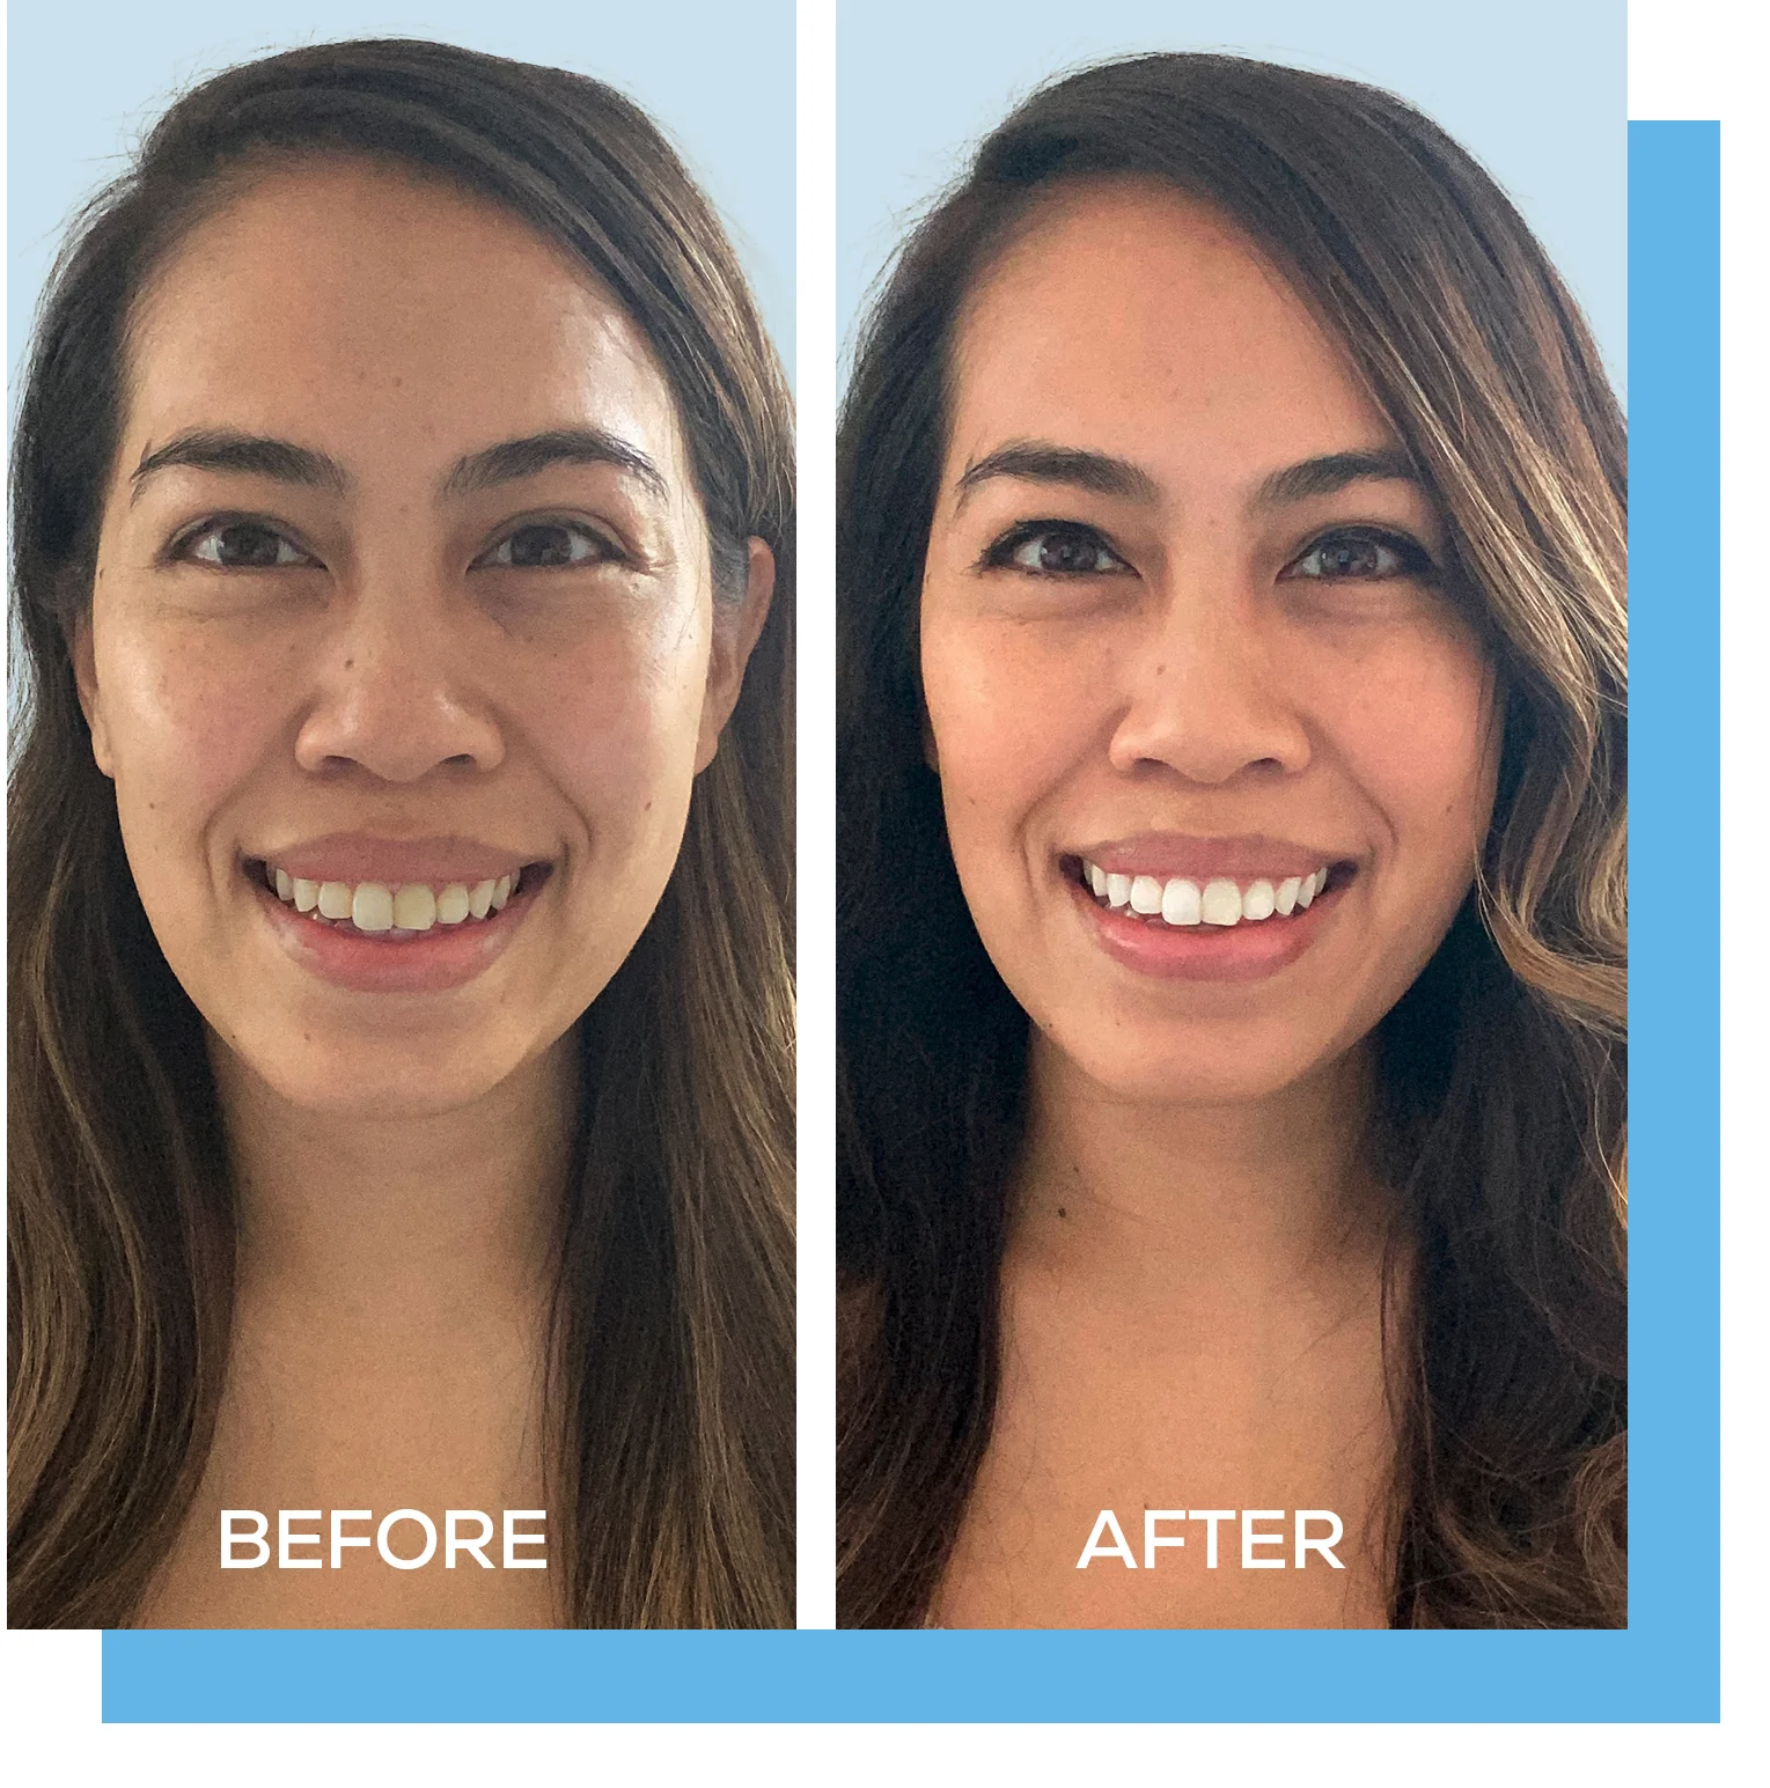 GLO Science Teeth Whitening patient Before & After results